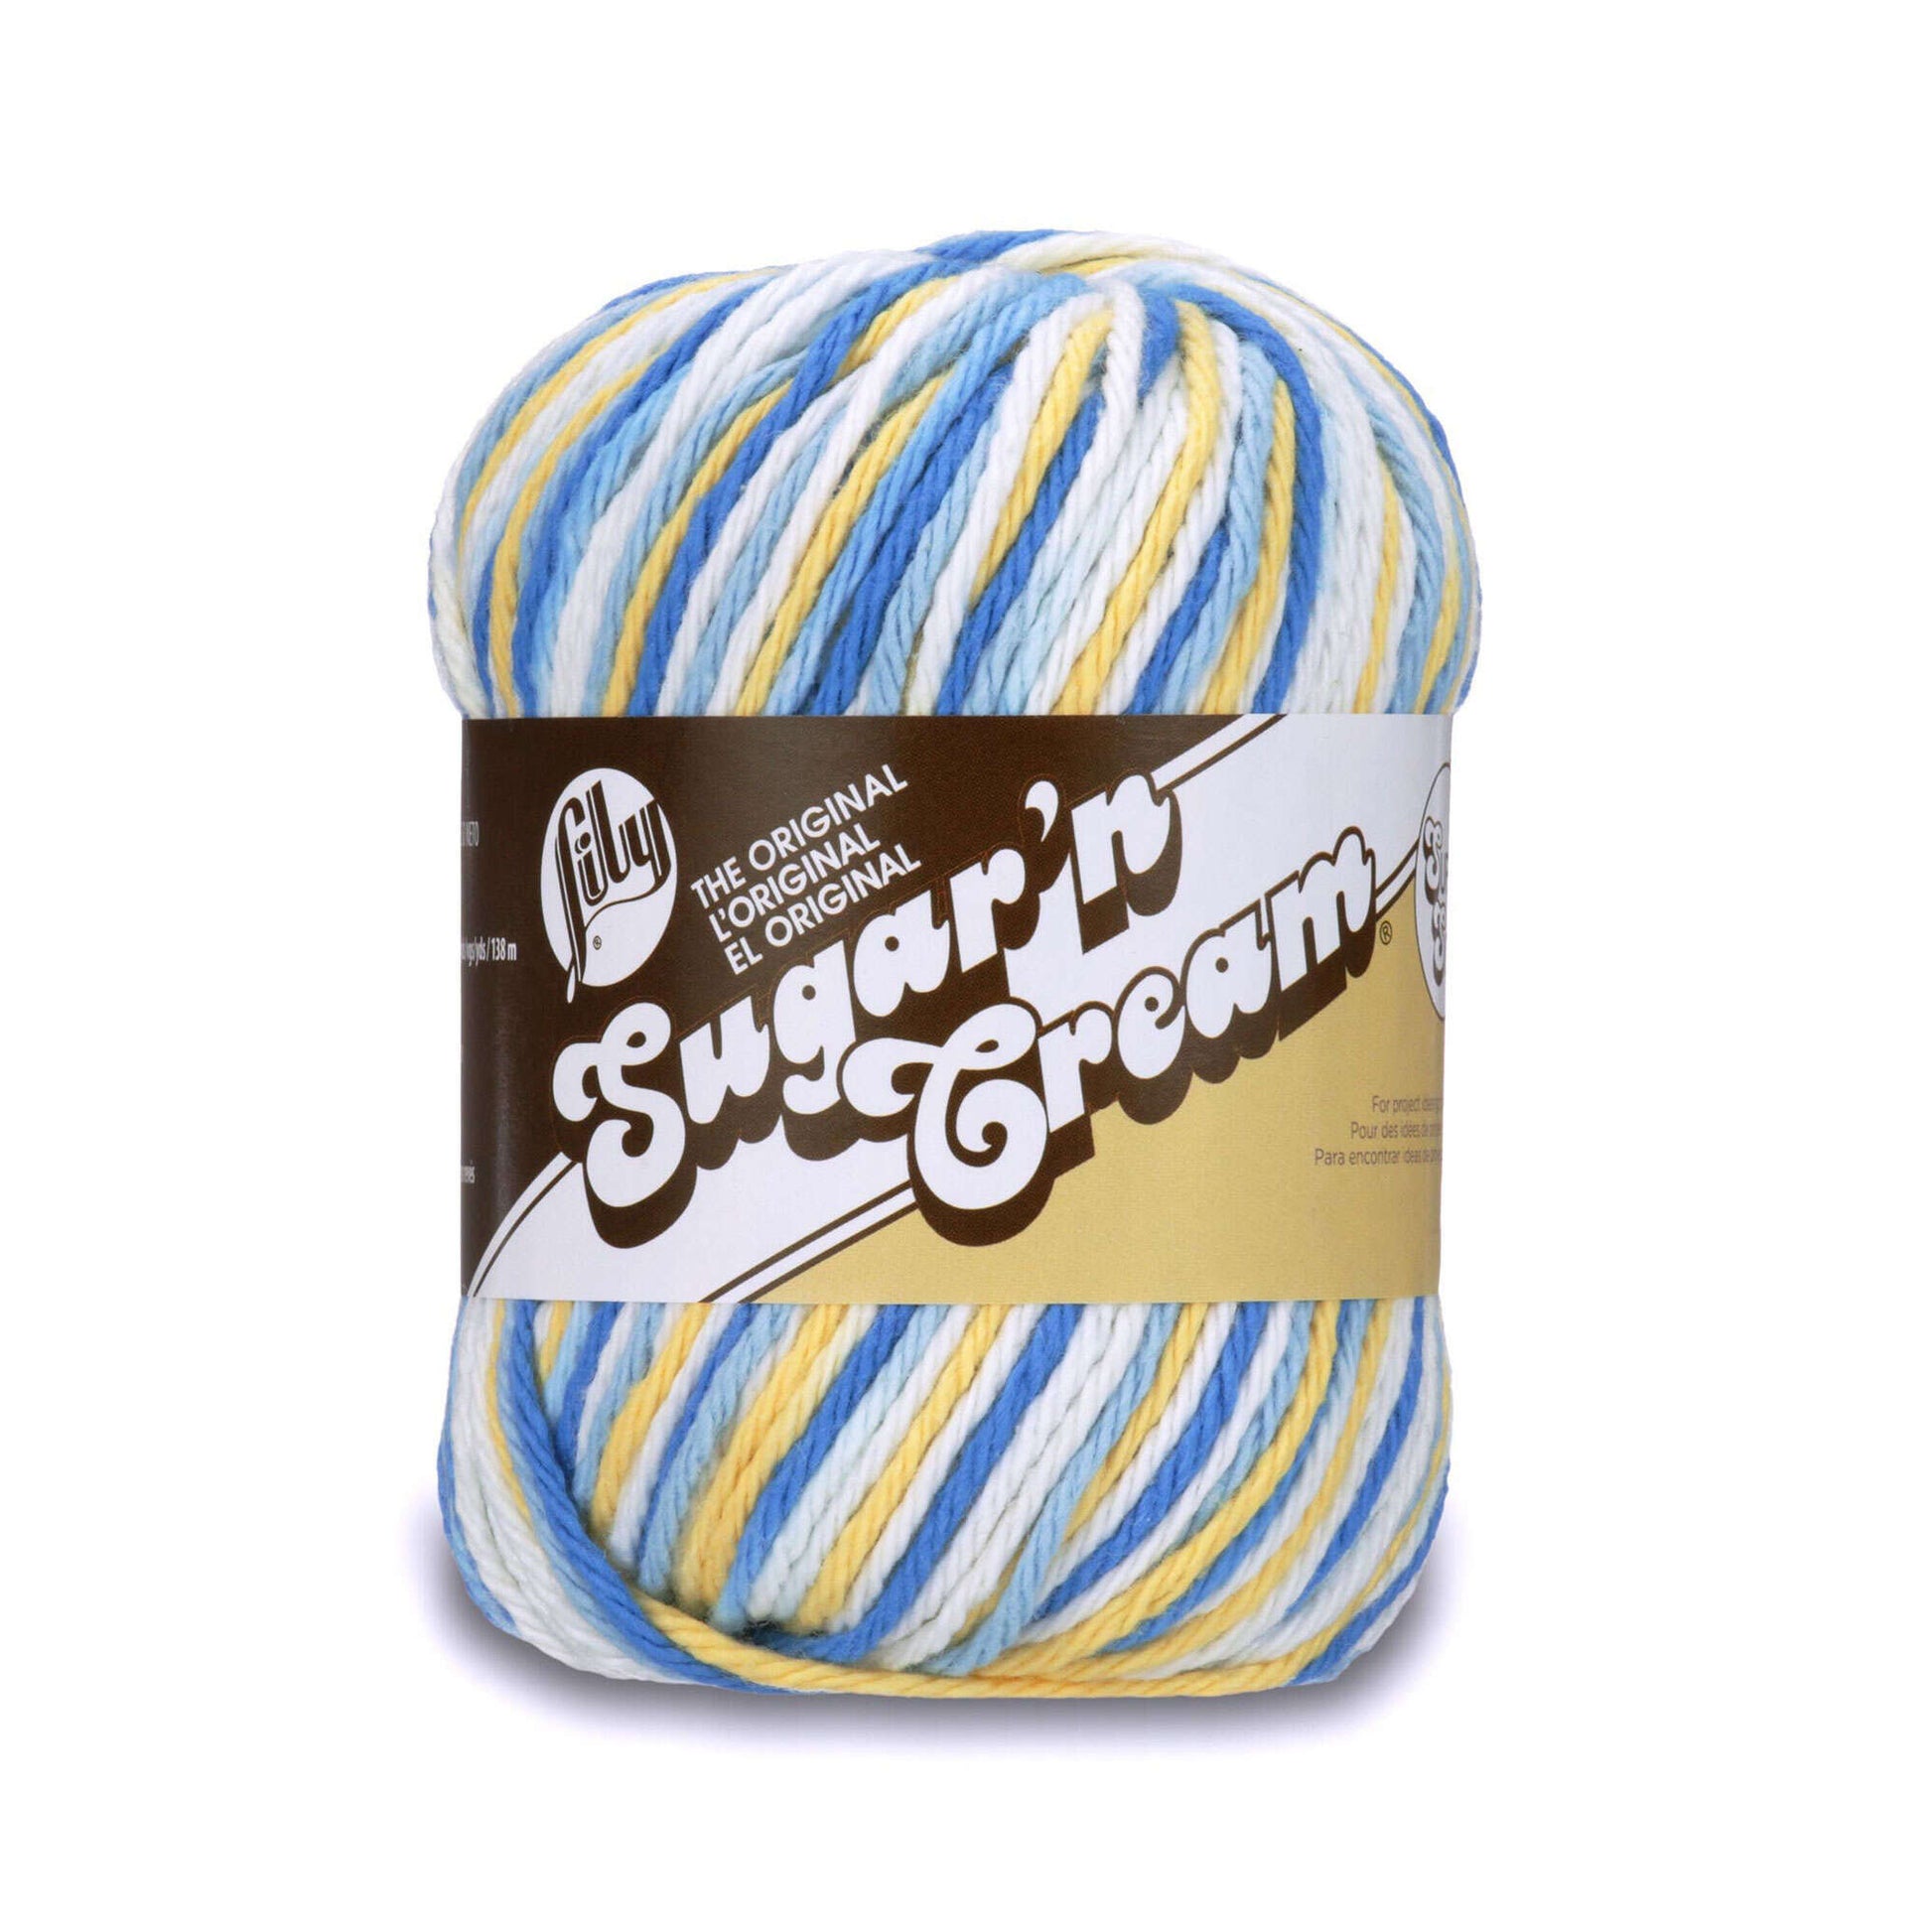 Lily Sugar'n Cream Super Size Ombres Yarn Sunkissed